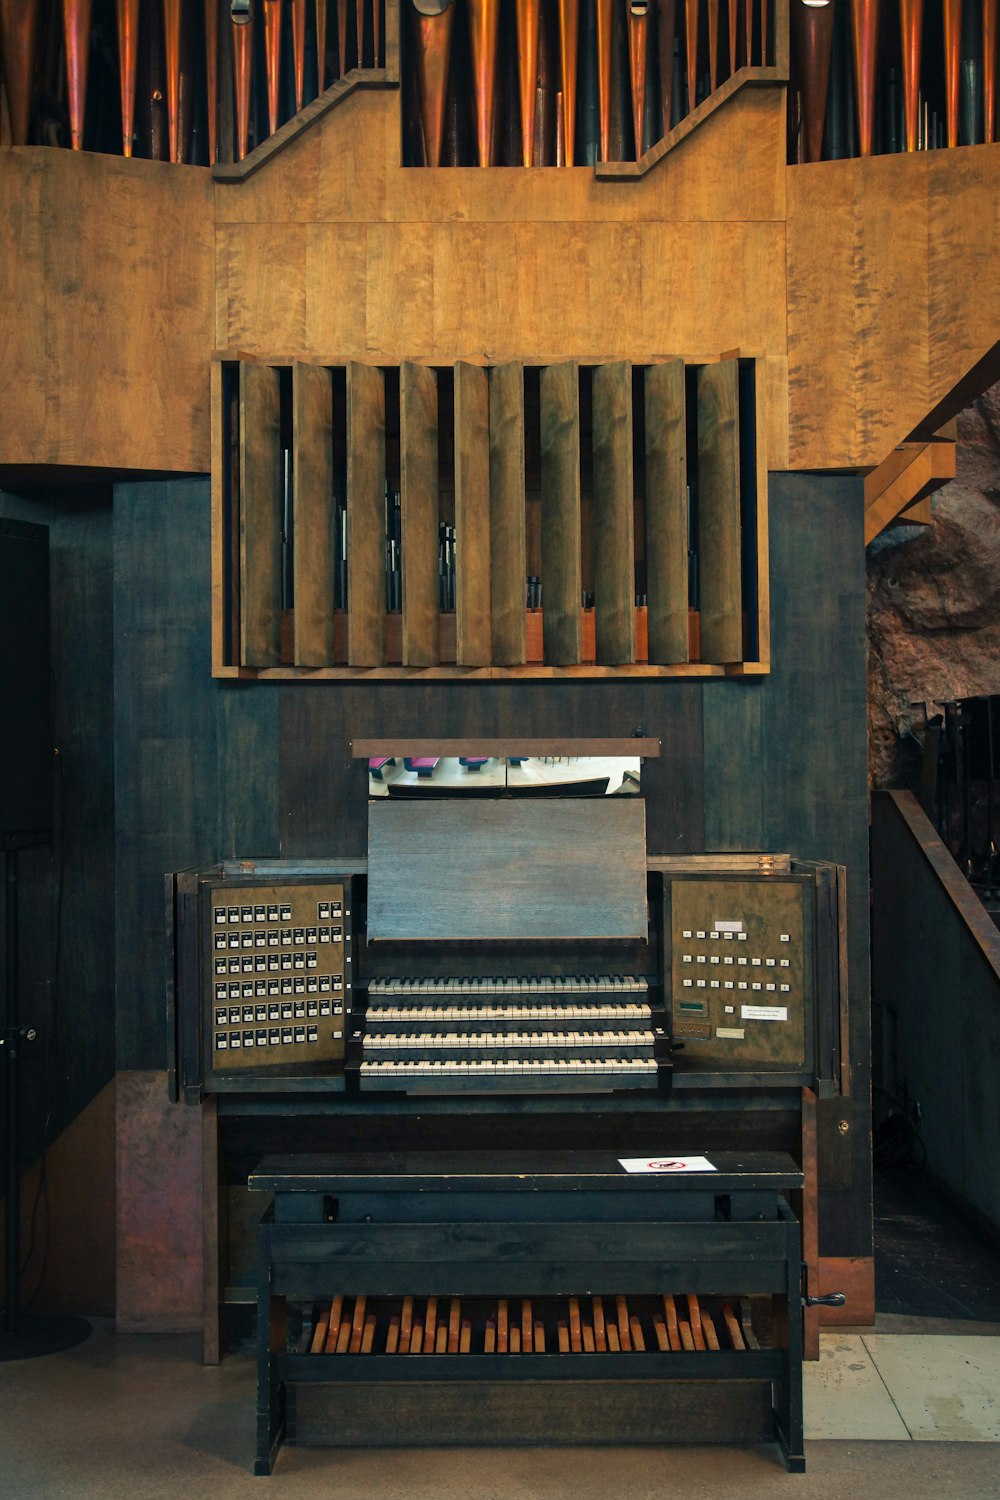 an old typewriter sitting in a room next to a pipe organ